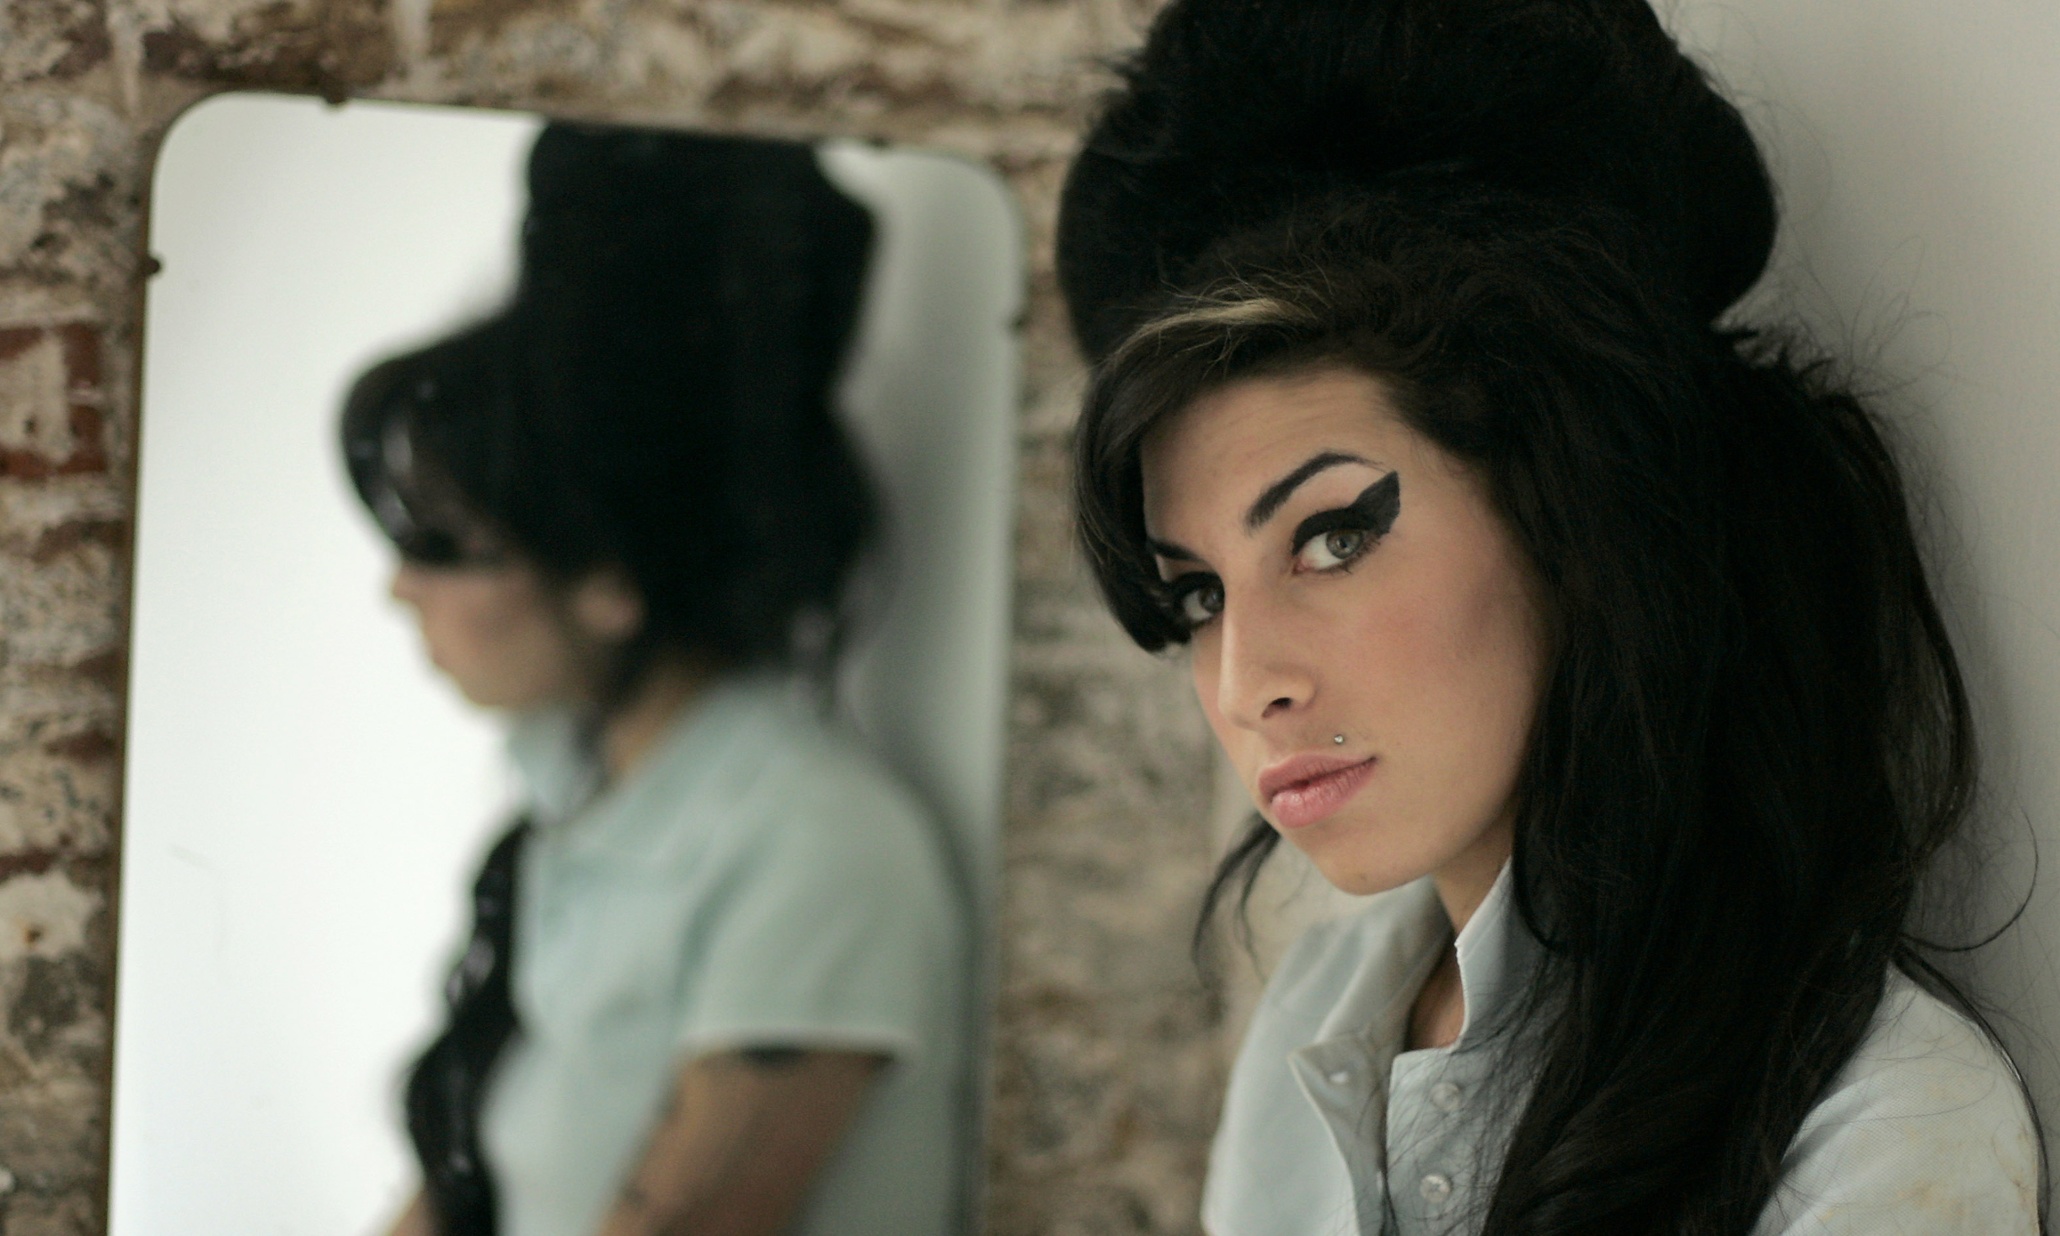 top films of 2015 FILE - In this Feb. 16, 2007 file photo, British singer Amy Winehouse poses for photographs after being interviewed by The Associated Press at a studio in north London. Amy Winehouse, the beehived soul-jazz diva whose self-destructive habits overshadowed a distinctive musical talent, was found dead Saturday in her London home, police said. She was 27. (AP Photo/Matt Dunham, File)